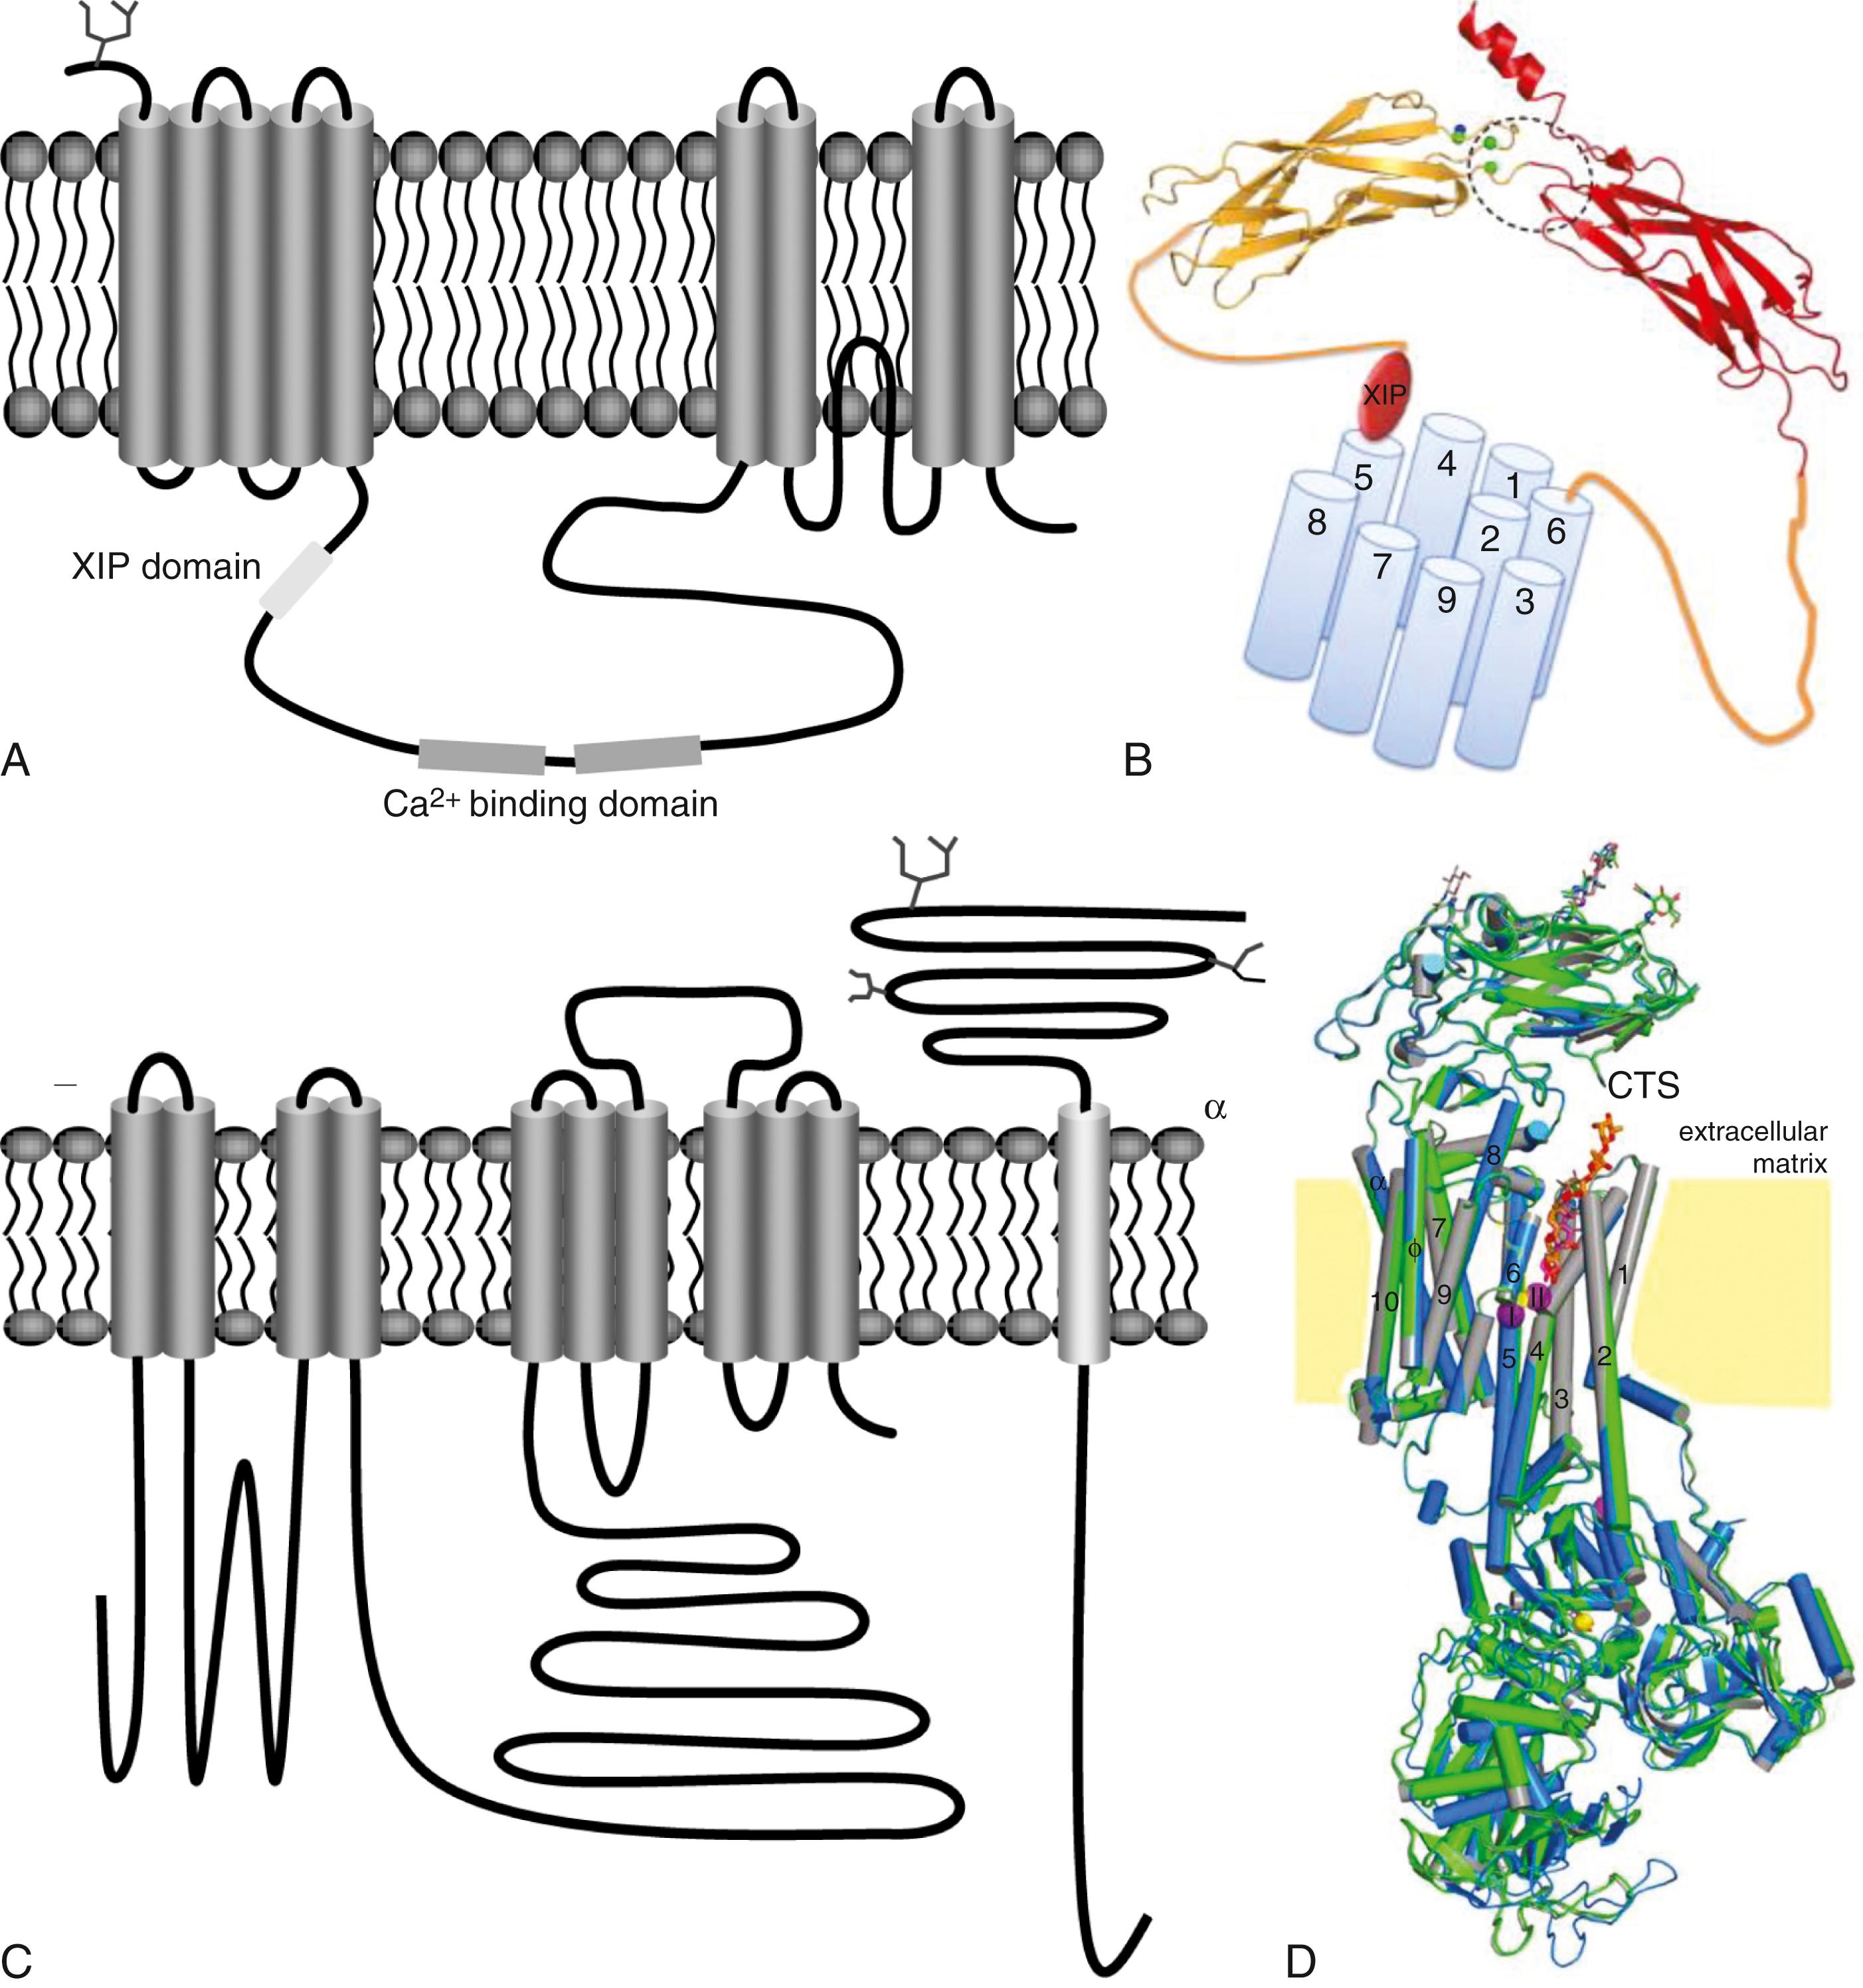 FIGURE 62.9, Transmembrane topology and predicted structures of Na + /Ca 2+ exchanger (NCX) and the Na + ,K + -ATPase (Na pump). A, Predicted topology of NCX, the cytoplasmic segment includes an autoinhibitory domain (XIP) and two Ca 2+ -binding domains. B, Predicted structure; the cytoplasmic surface is on top. C, Topologic structure of the α and β subunits of Na + ,K + -ATPase. D, Overlapping structures of the Na pump bound to three different cardiotonic steroids. CTS, Cardiotonic steroid.